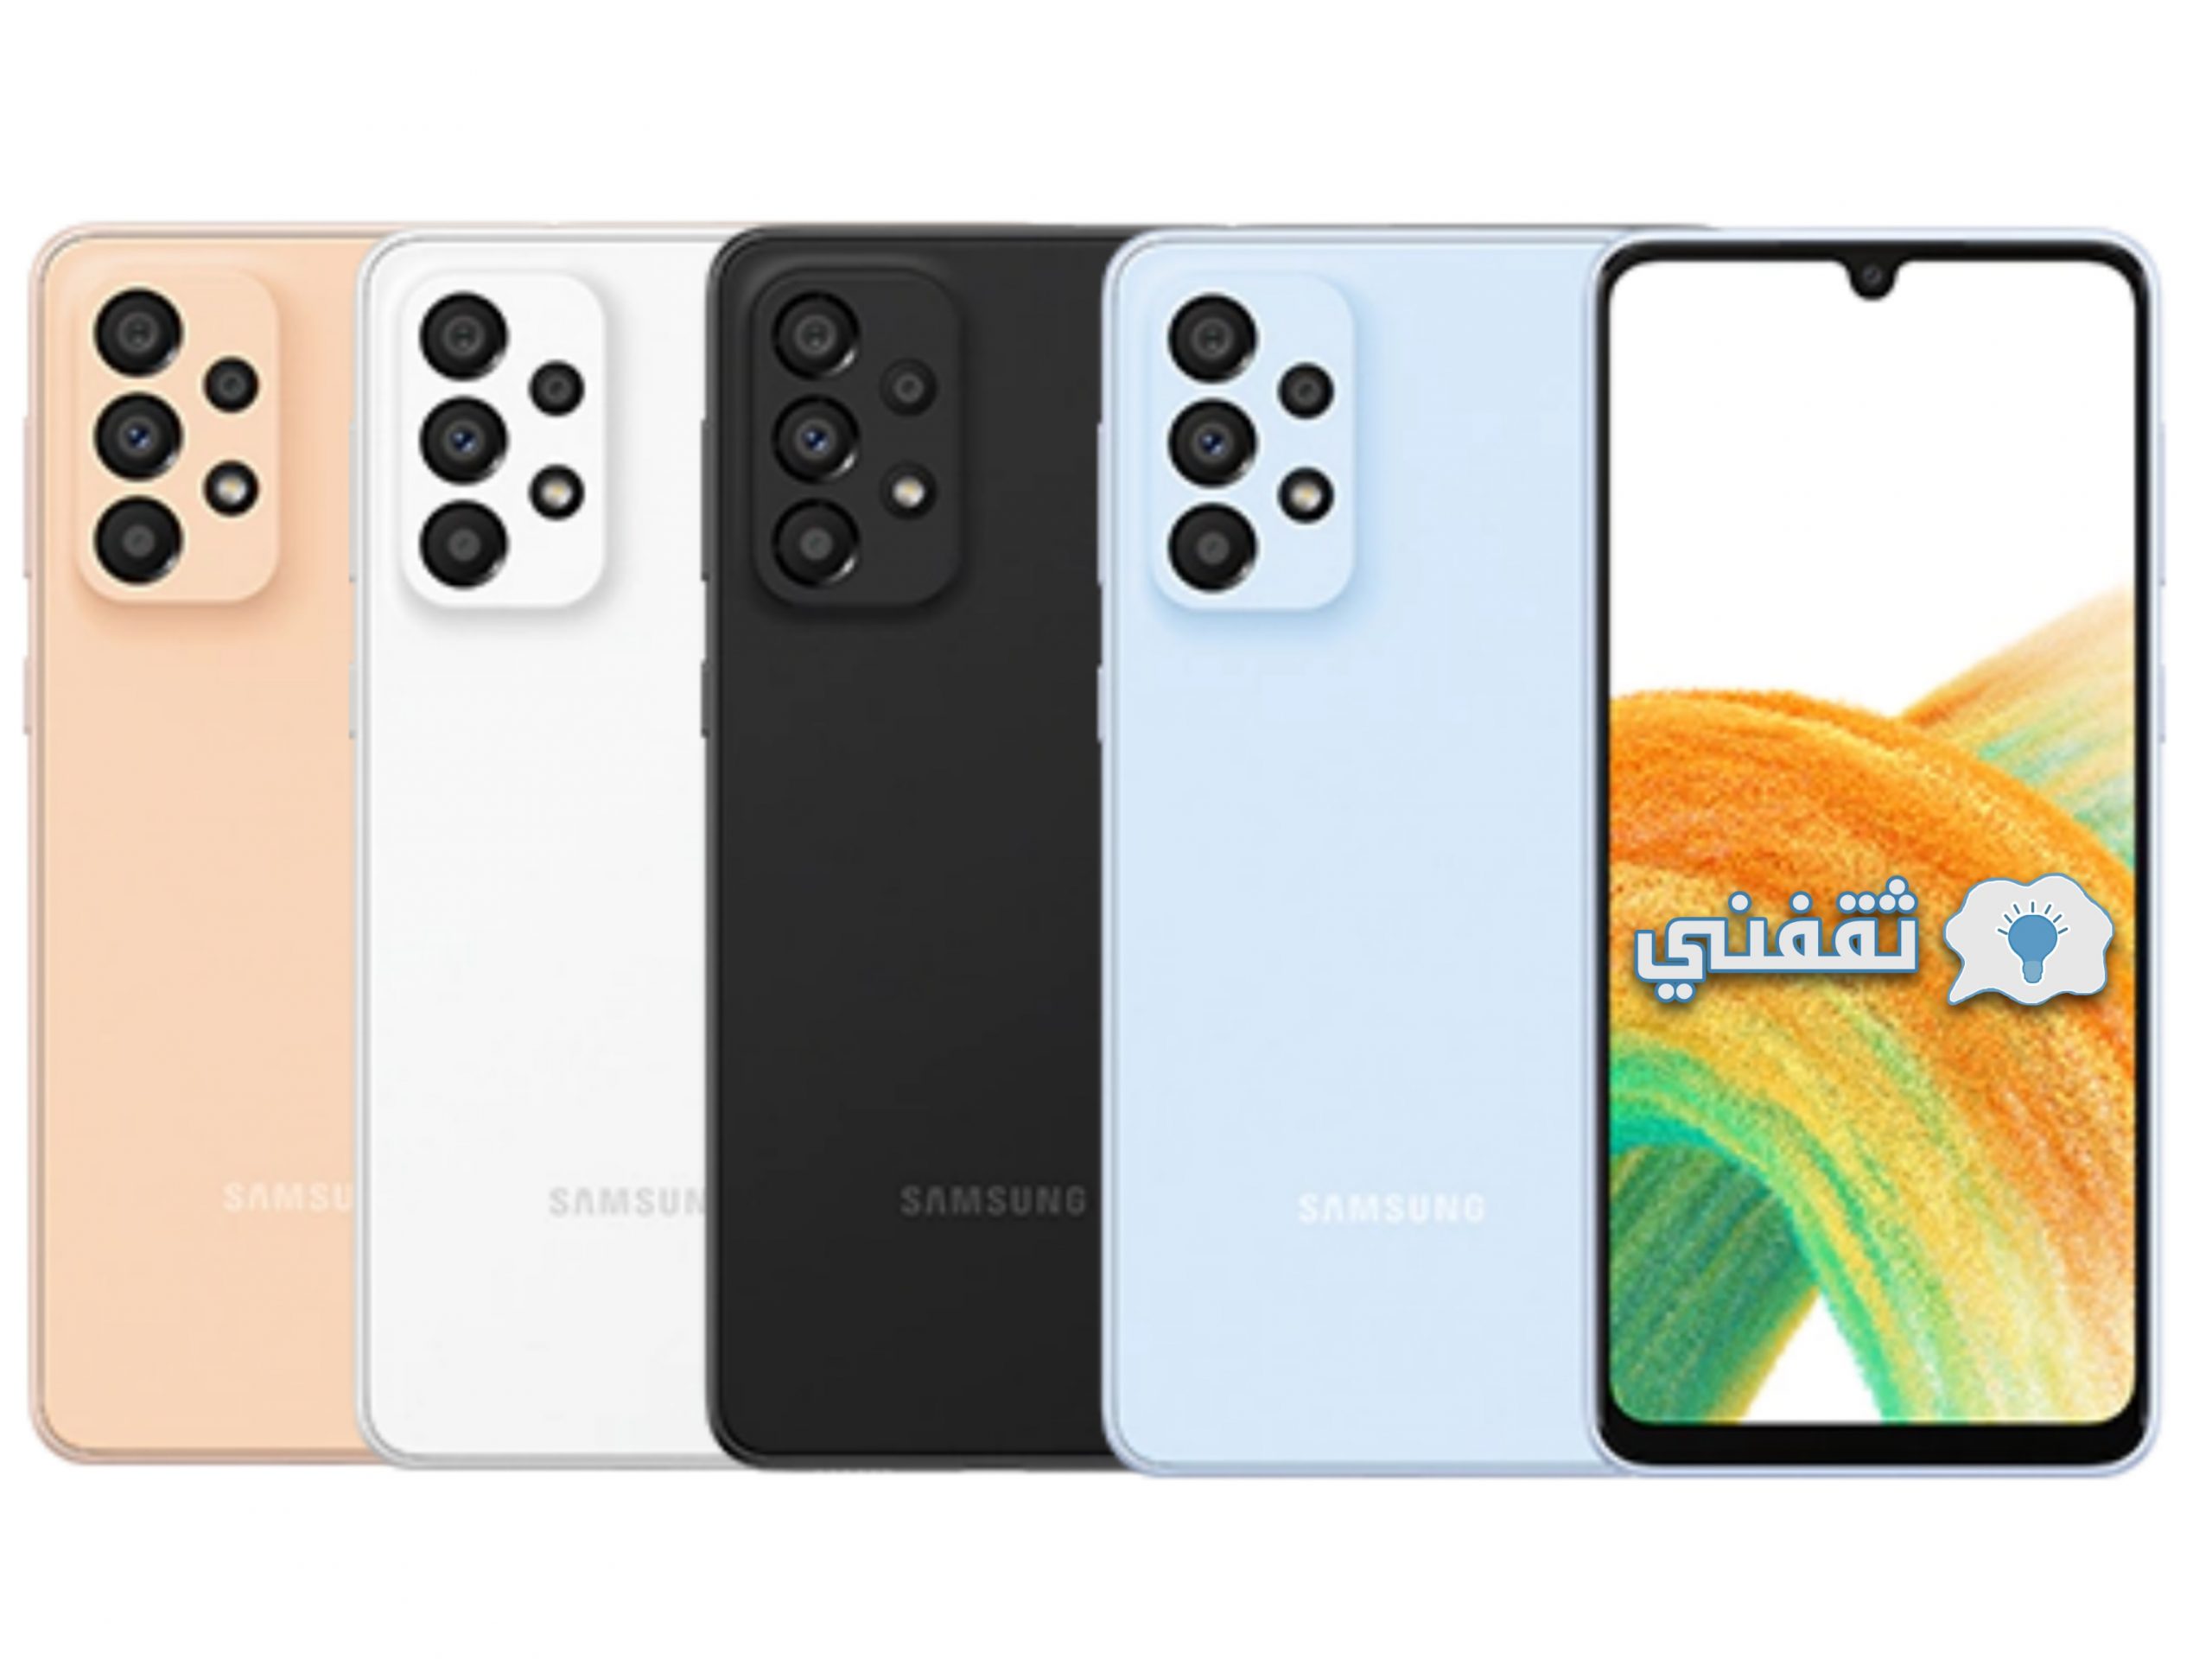 Samsung A33 5G phone colors